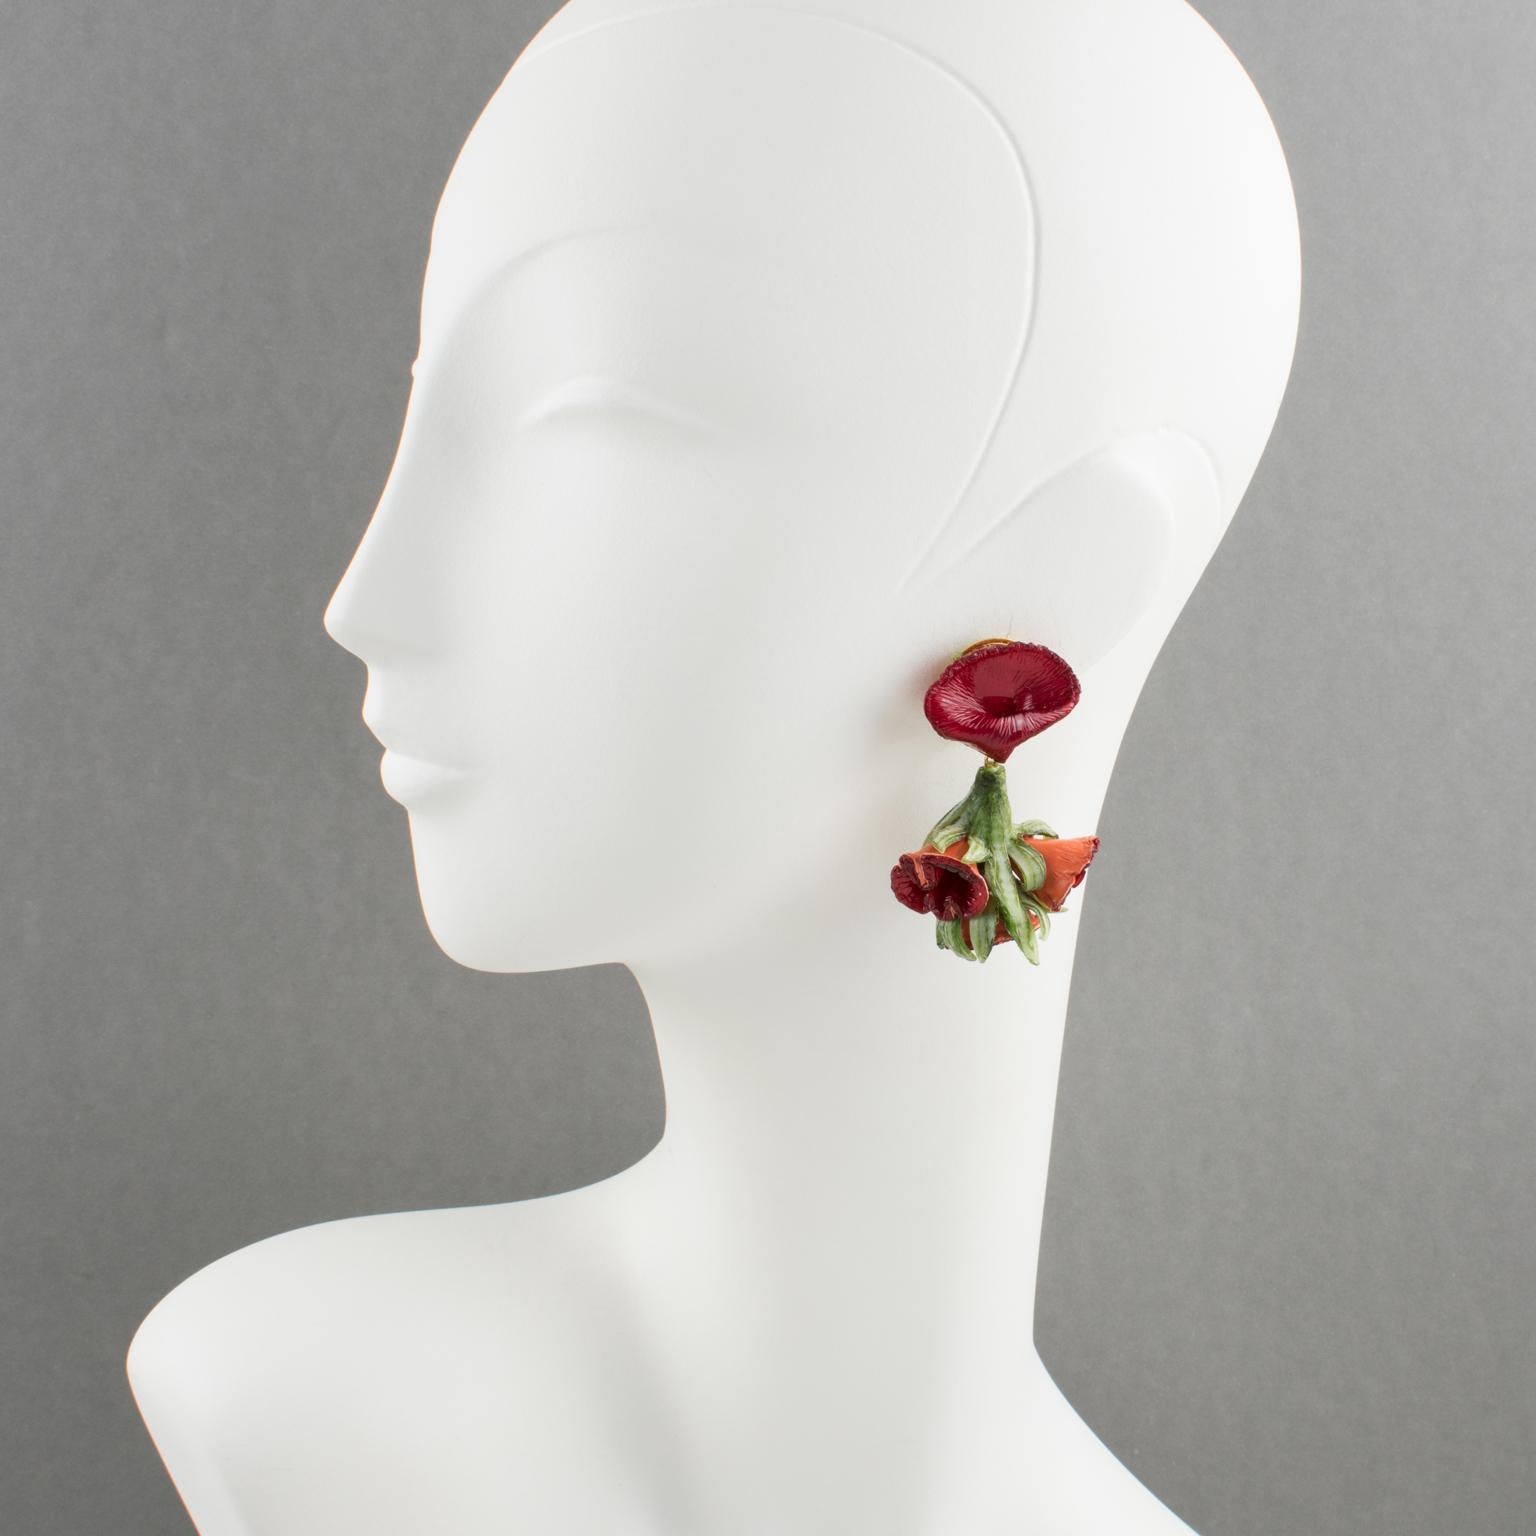 These romantic French Jewelry Designer Francoise Montague Paris clip-on earrings are designed by Cilea. The dangle shape features dimensional flowers with leaves in assorted tones of ruby red and tender green. There is no visible maker's mark since